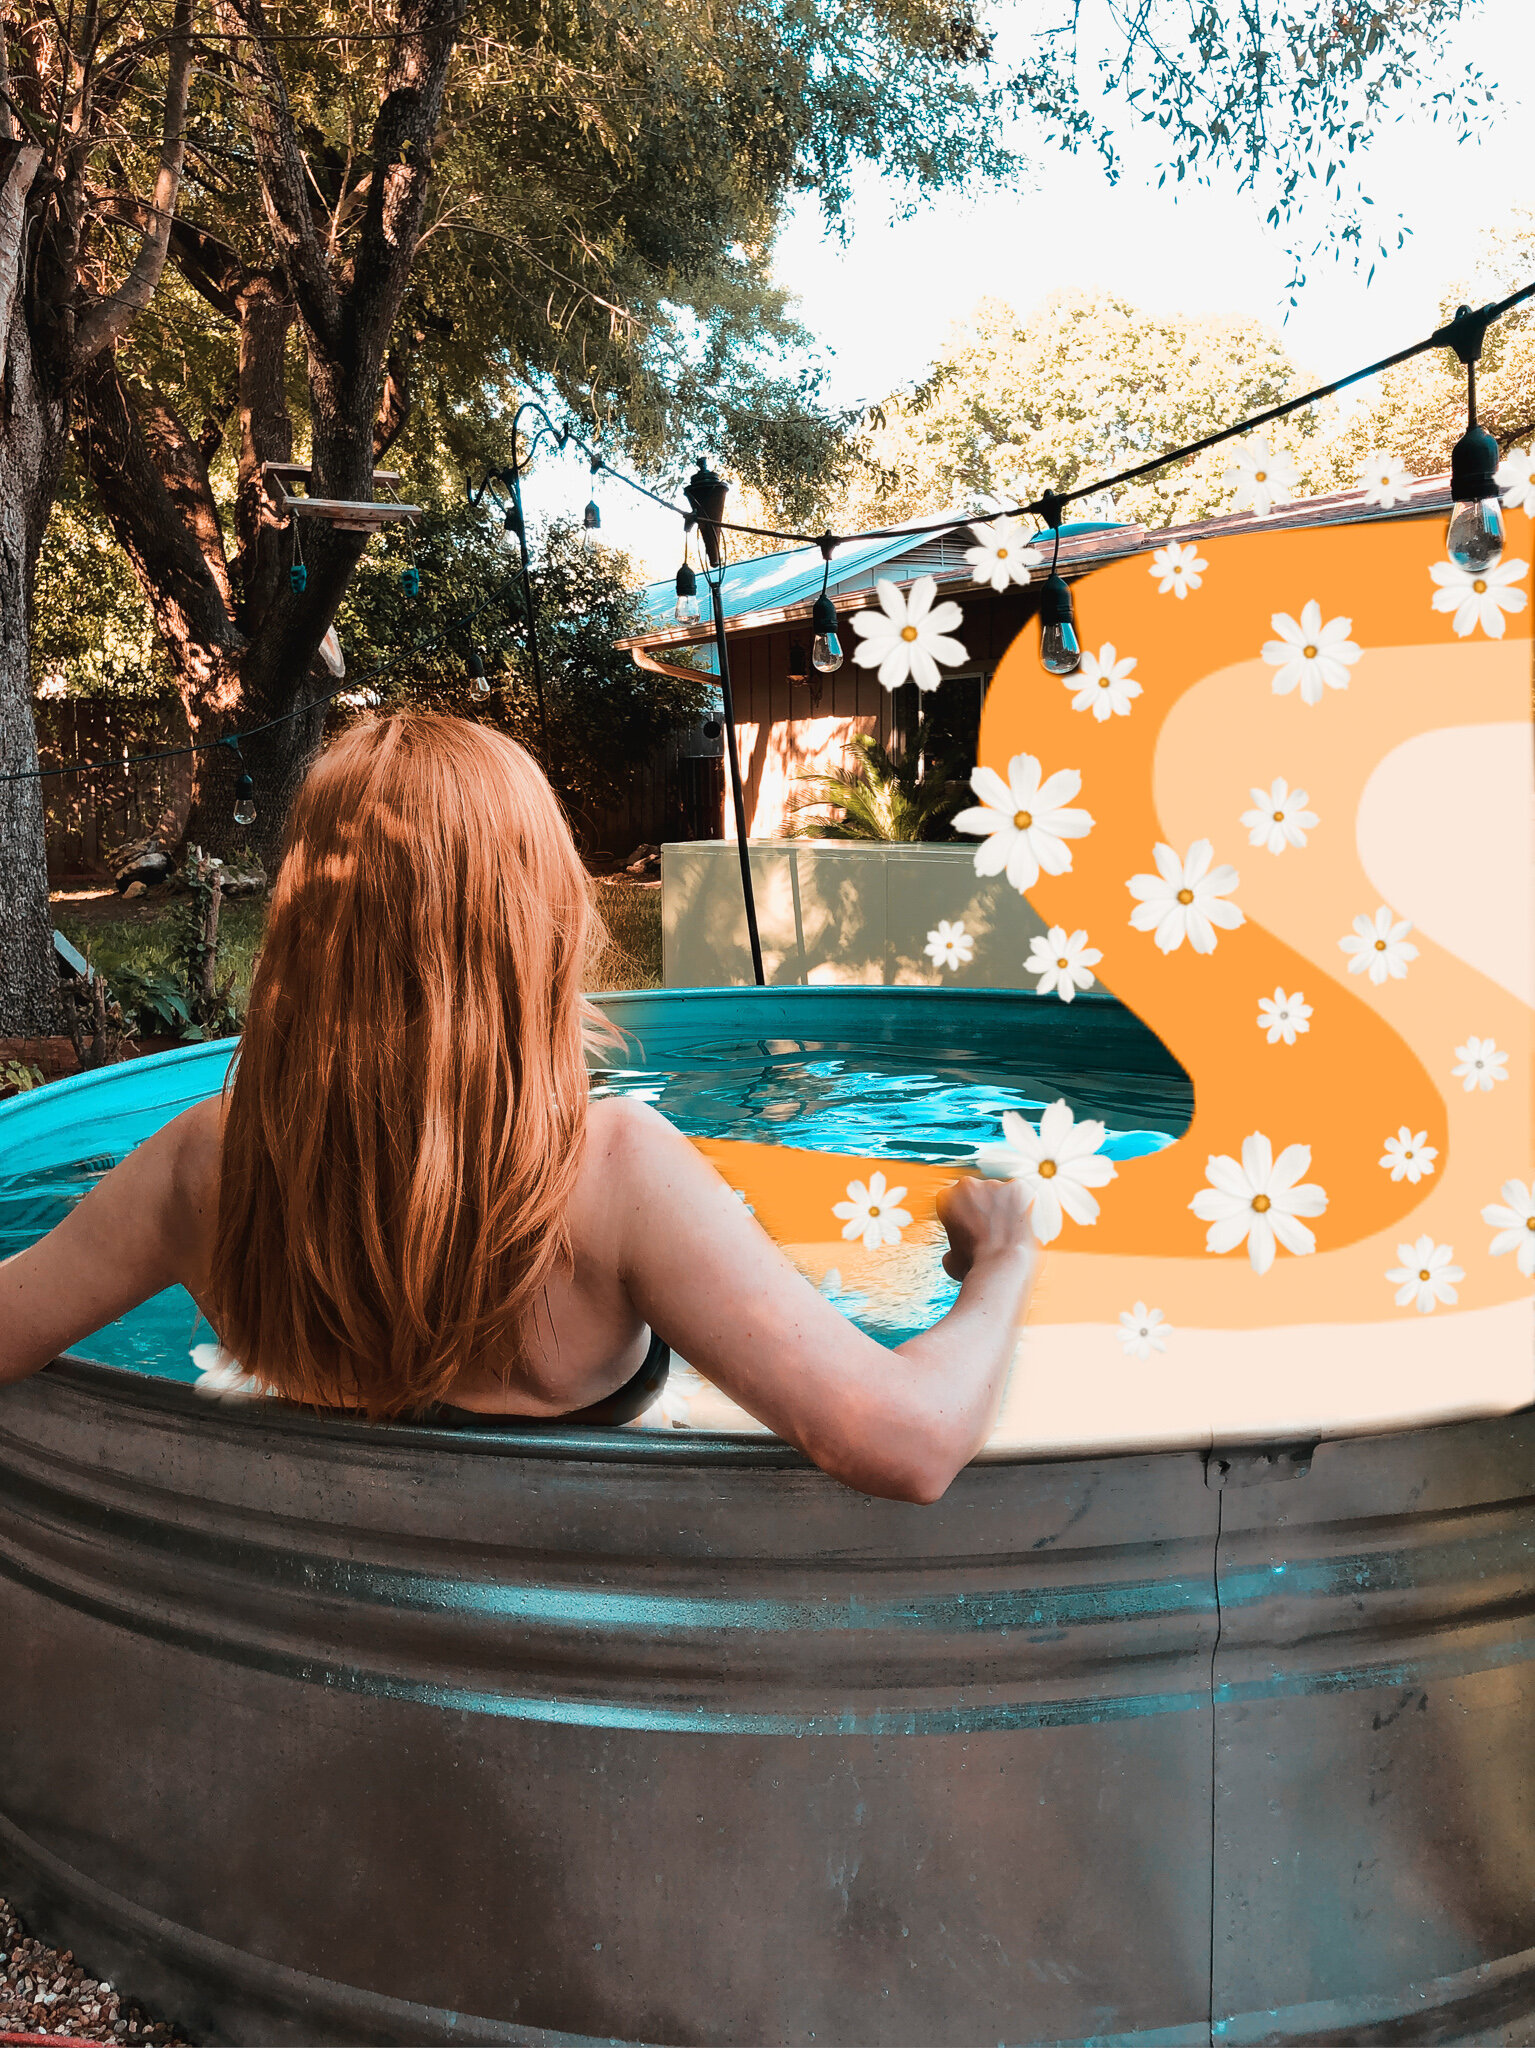 FLOAT ON WITH YOUR OWN DIY STOCK TANK POOL — mid-century millennial